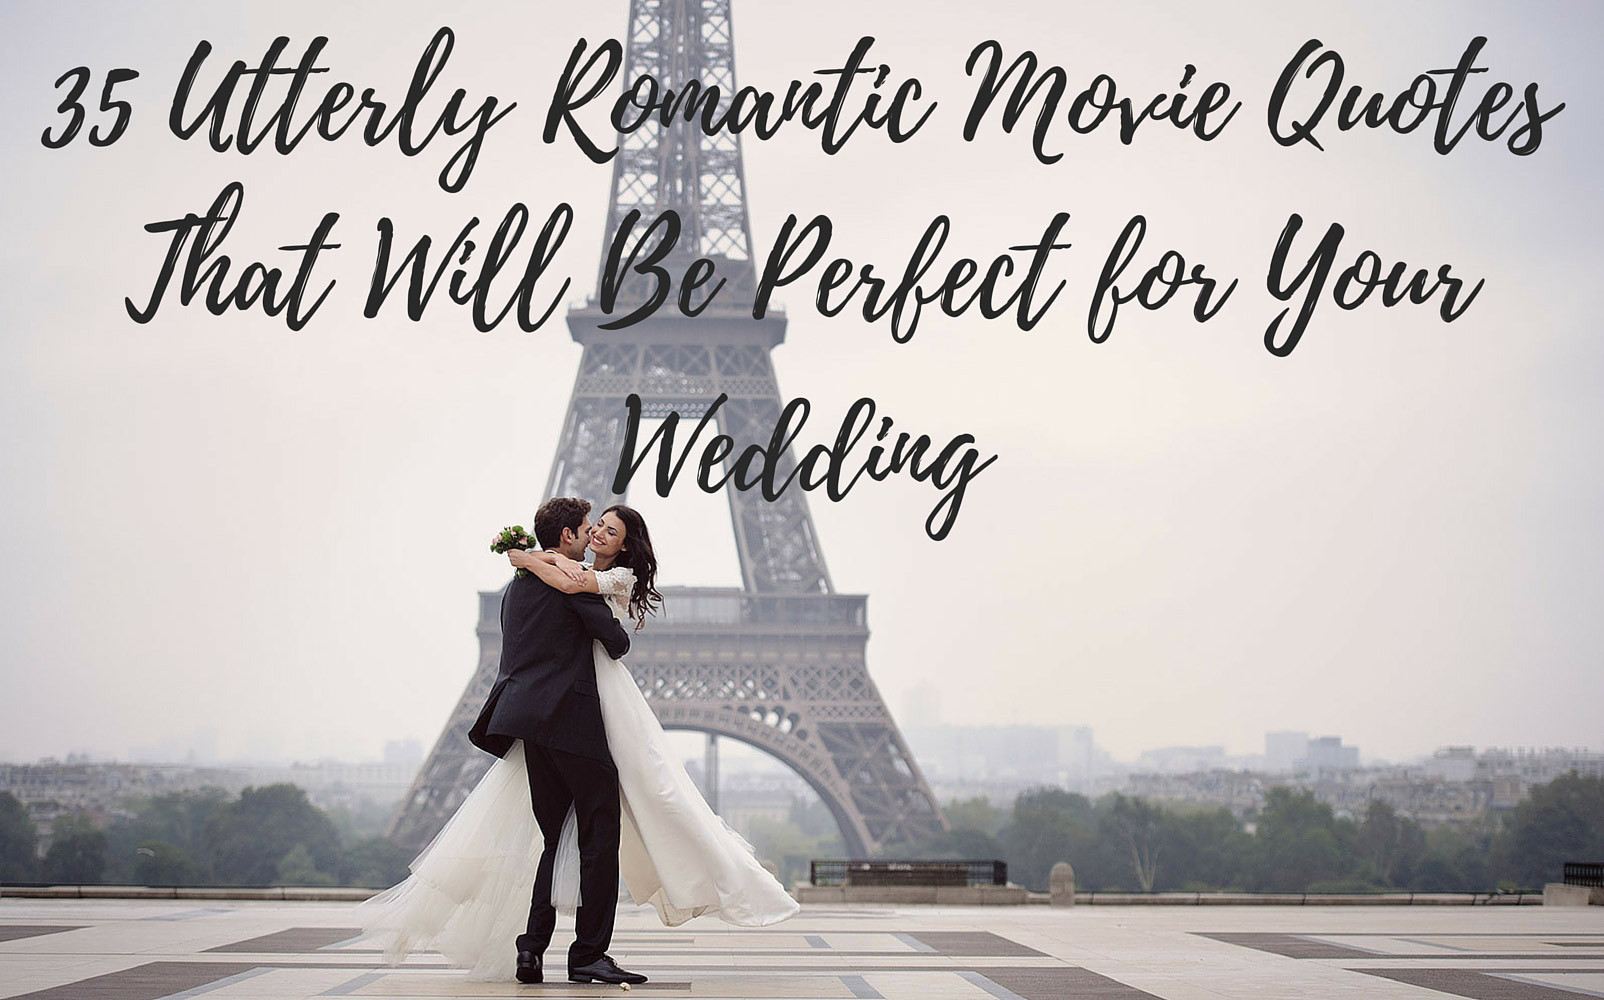 Movie Quotes About Love And Marriage
 Utterly Romantic Quotes from Movies